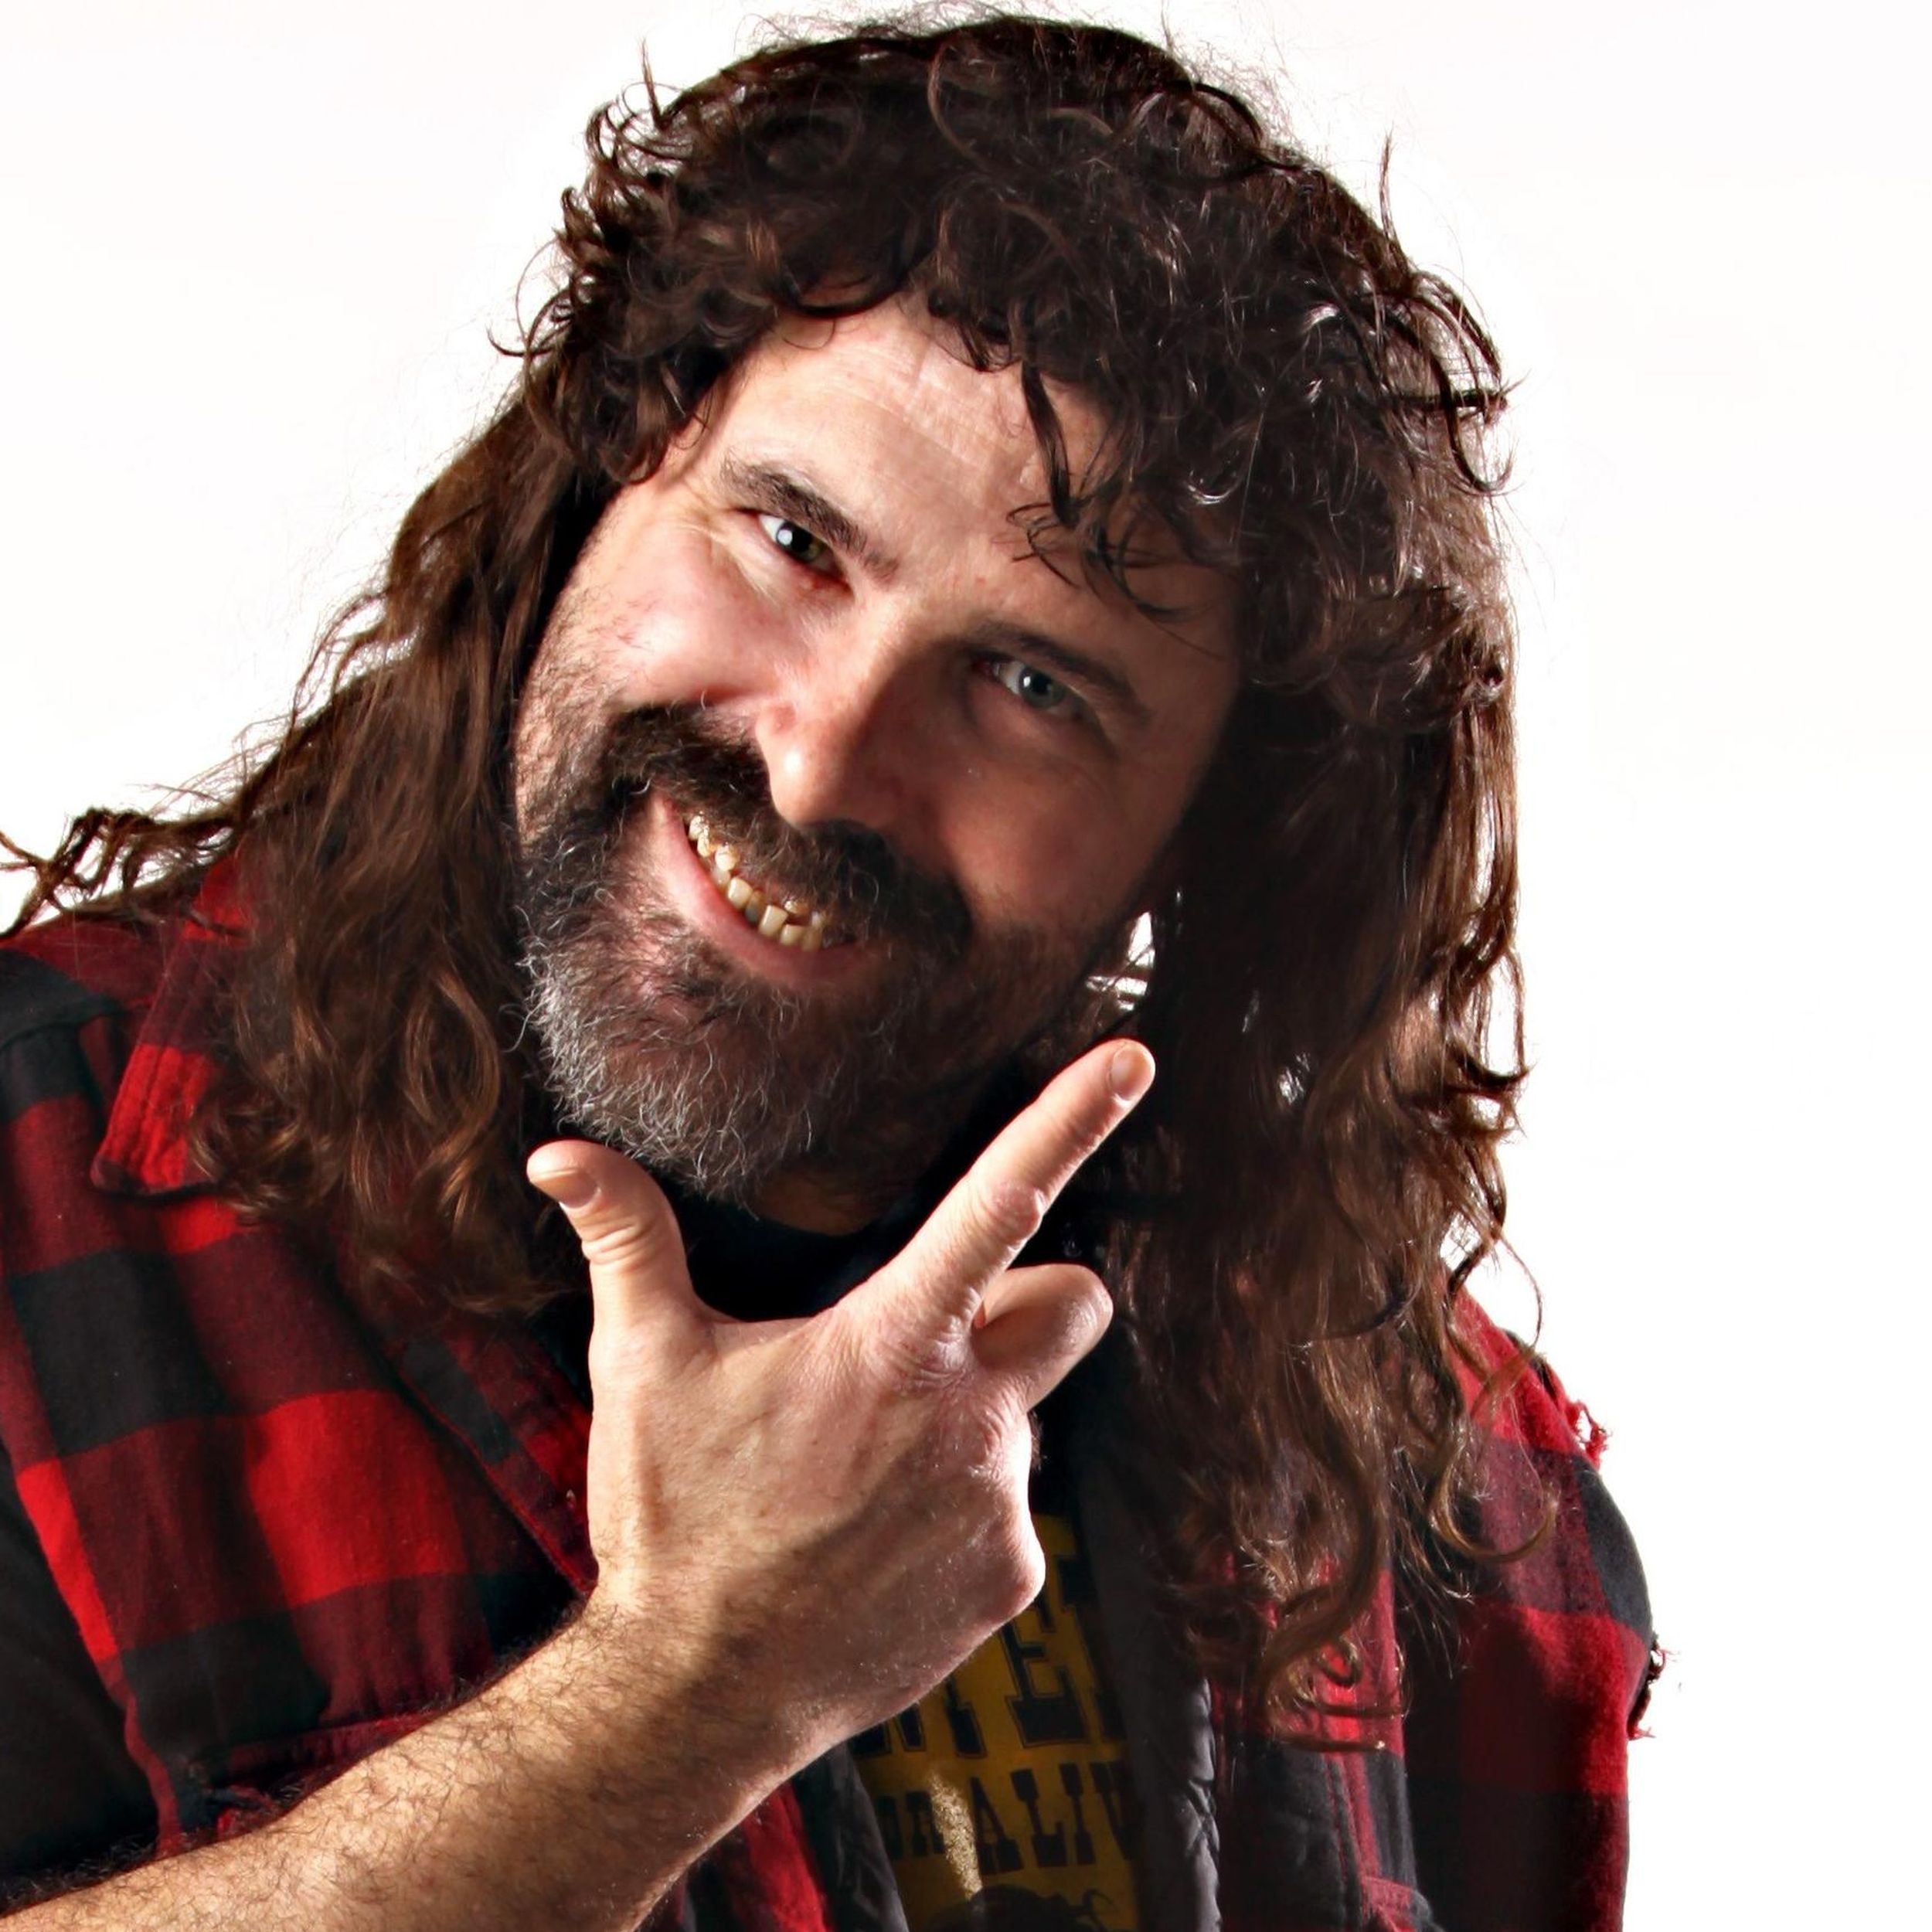 Mick Foley, head titled, grinning for the camera, hand in 